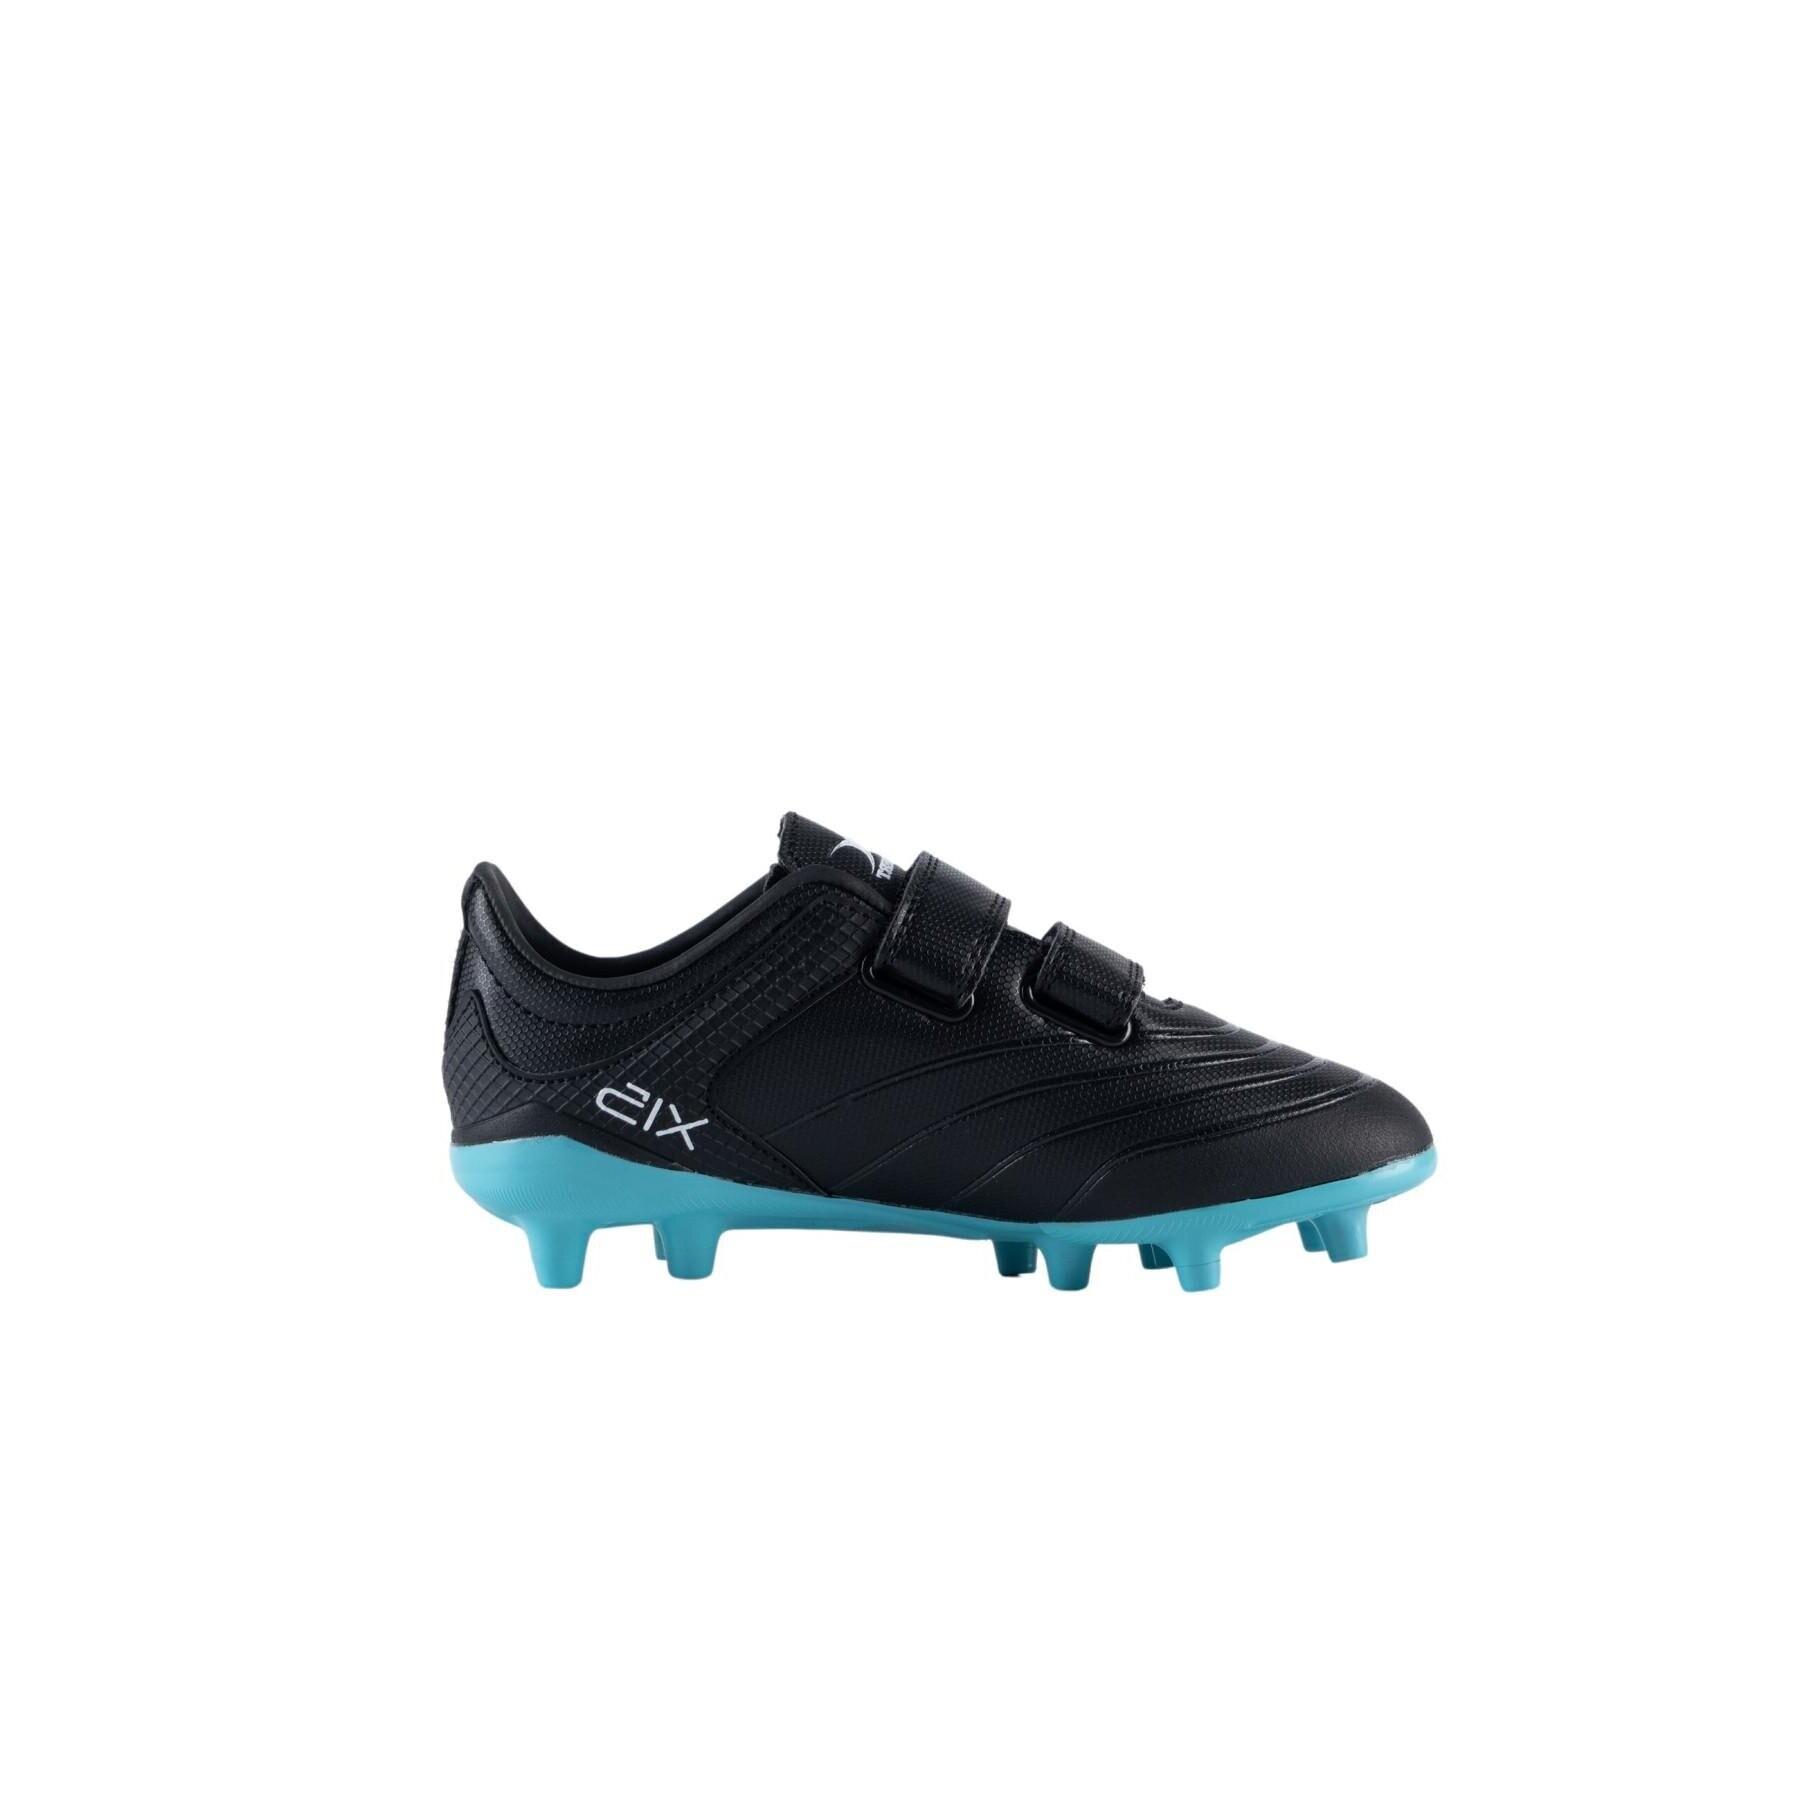 Kids rugby shoes Gilbert Sidestep X15 LO MSX